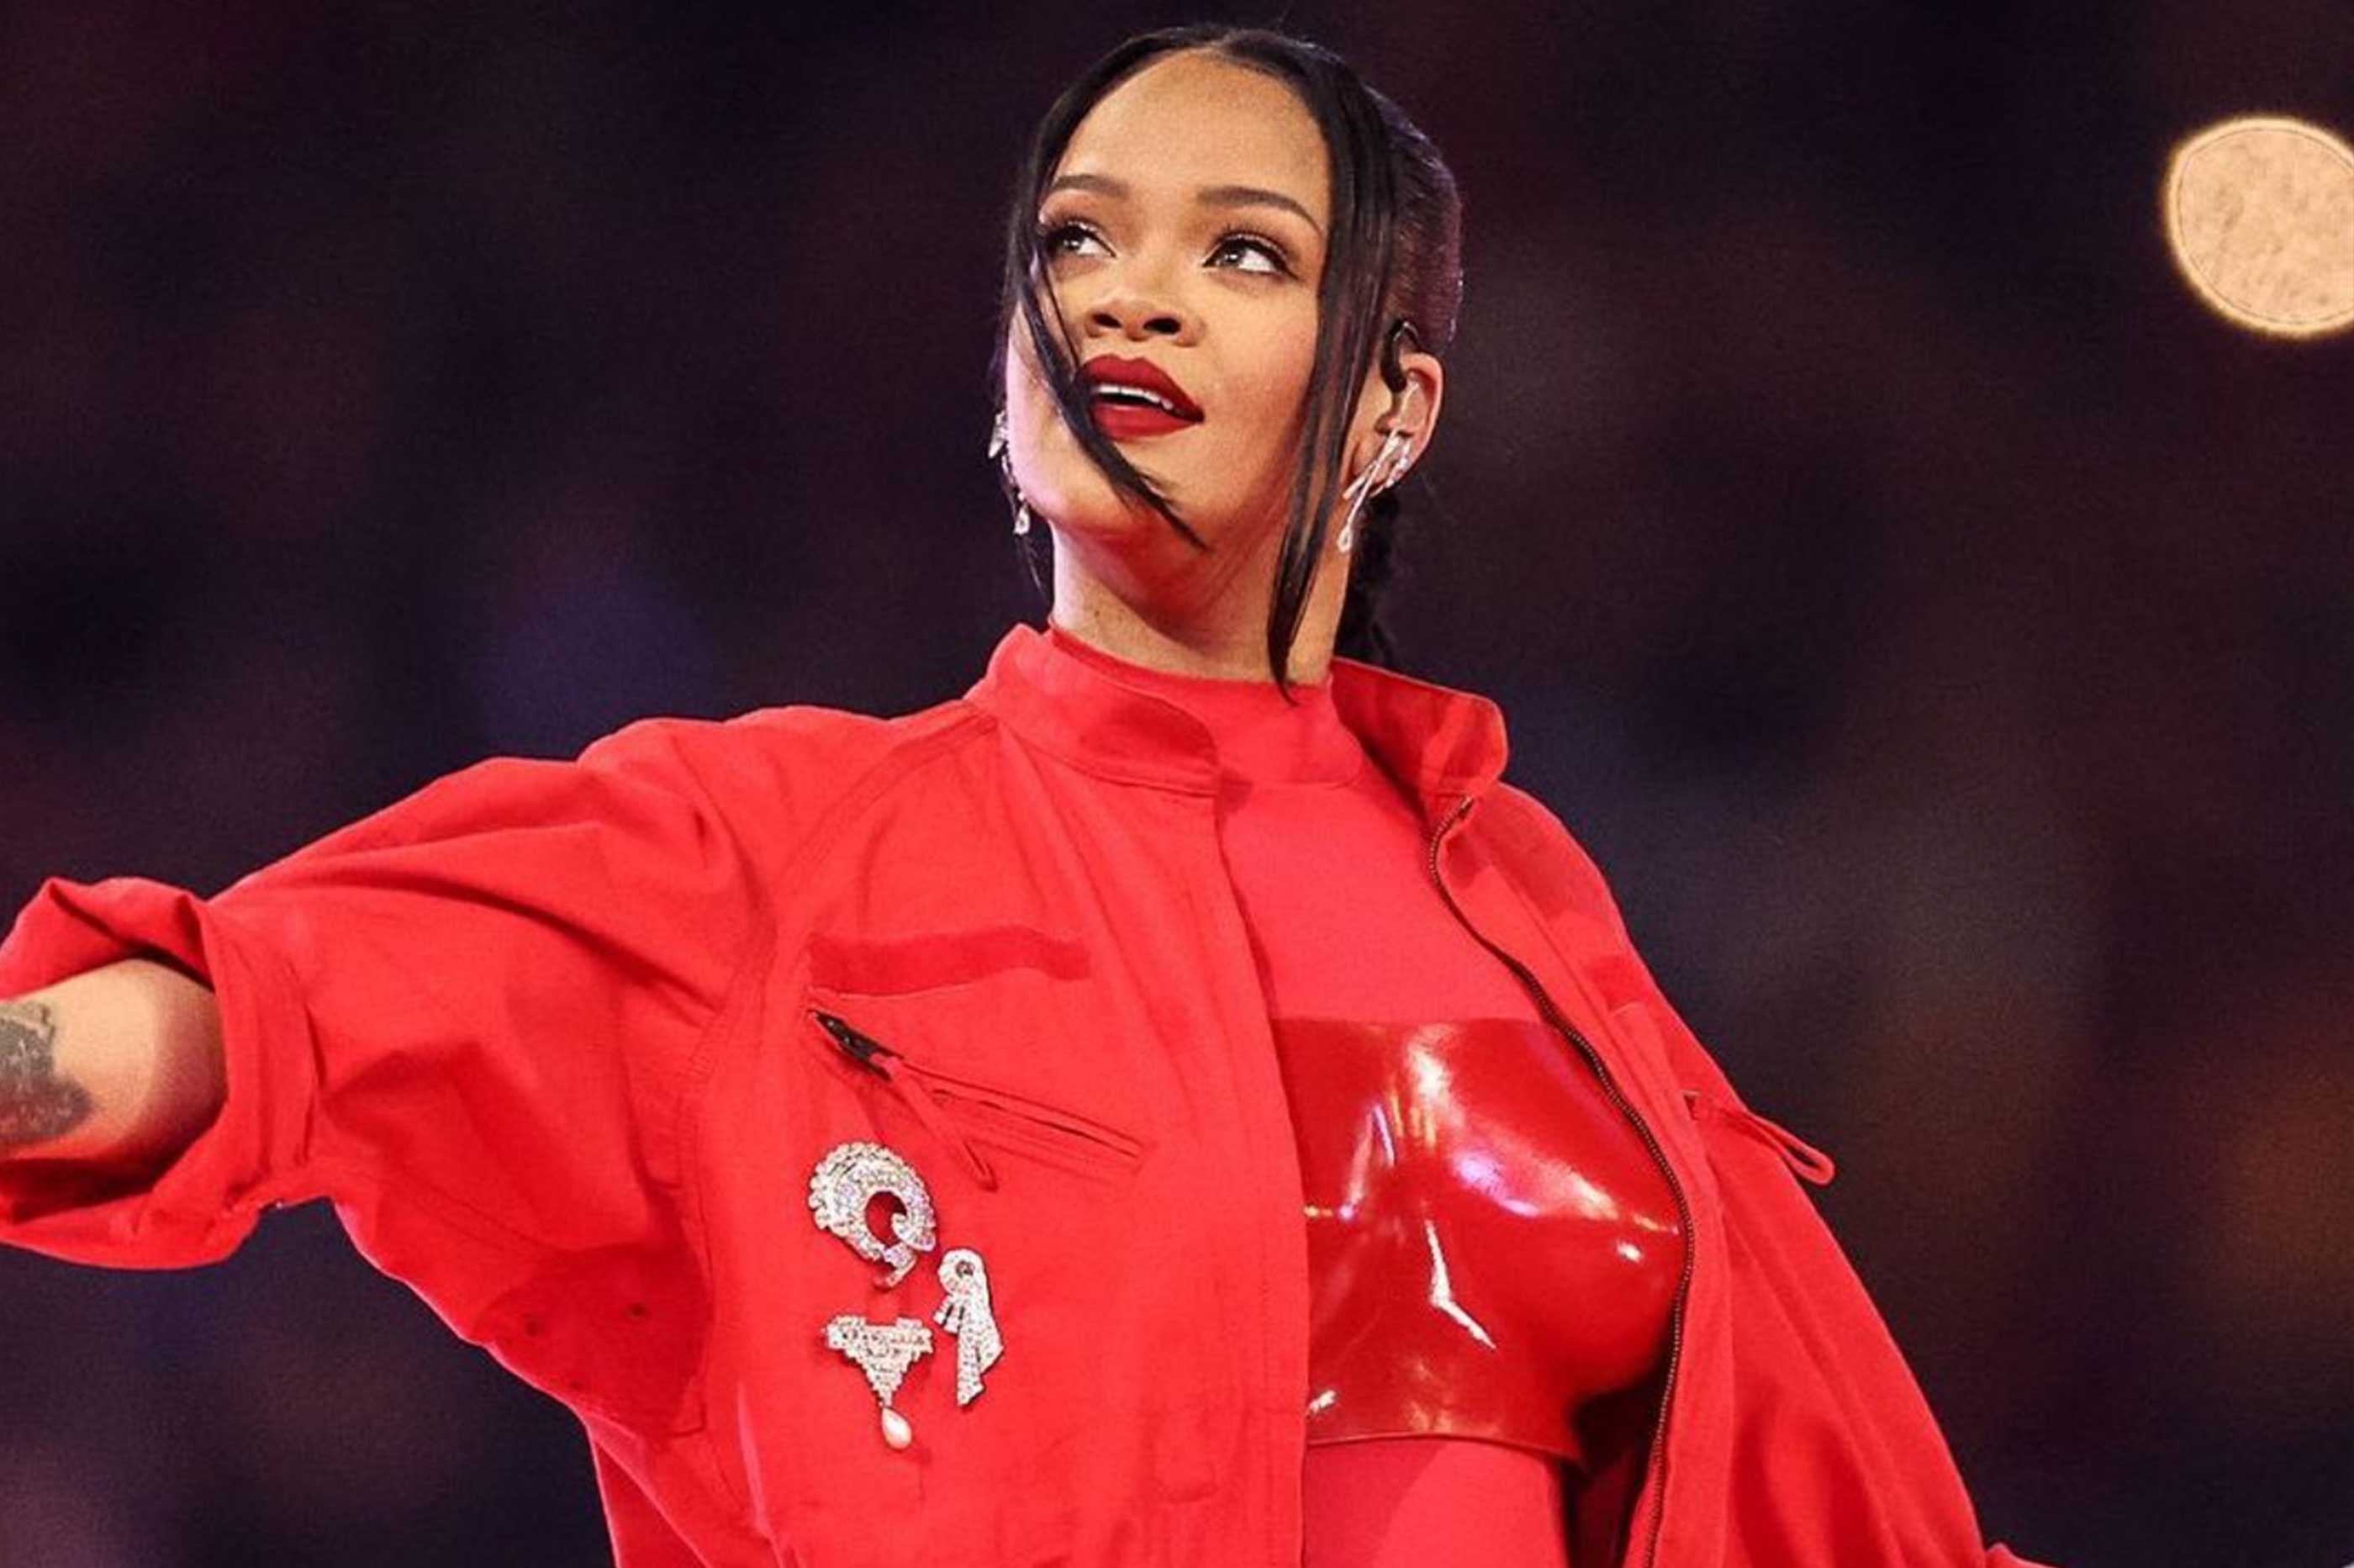 Rihanna honors André Leon Talley with Super Bowl 2023 halftime look